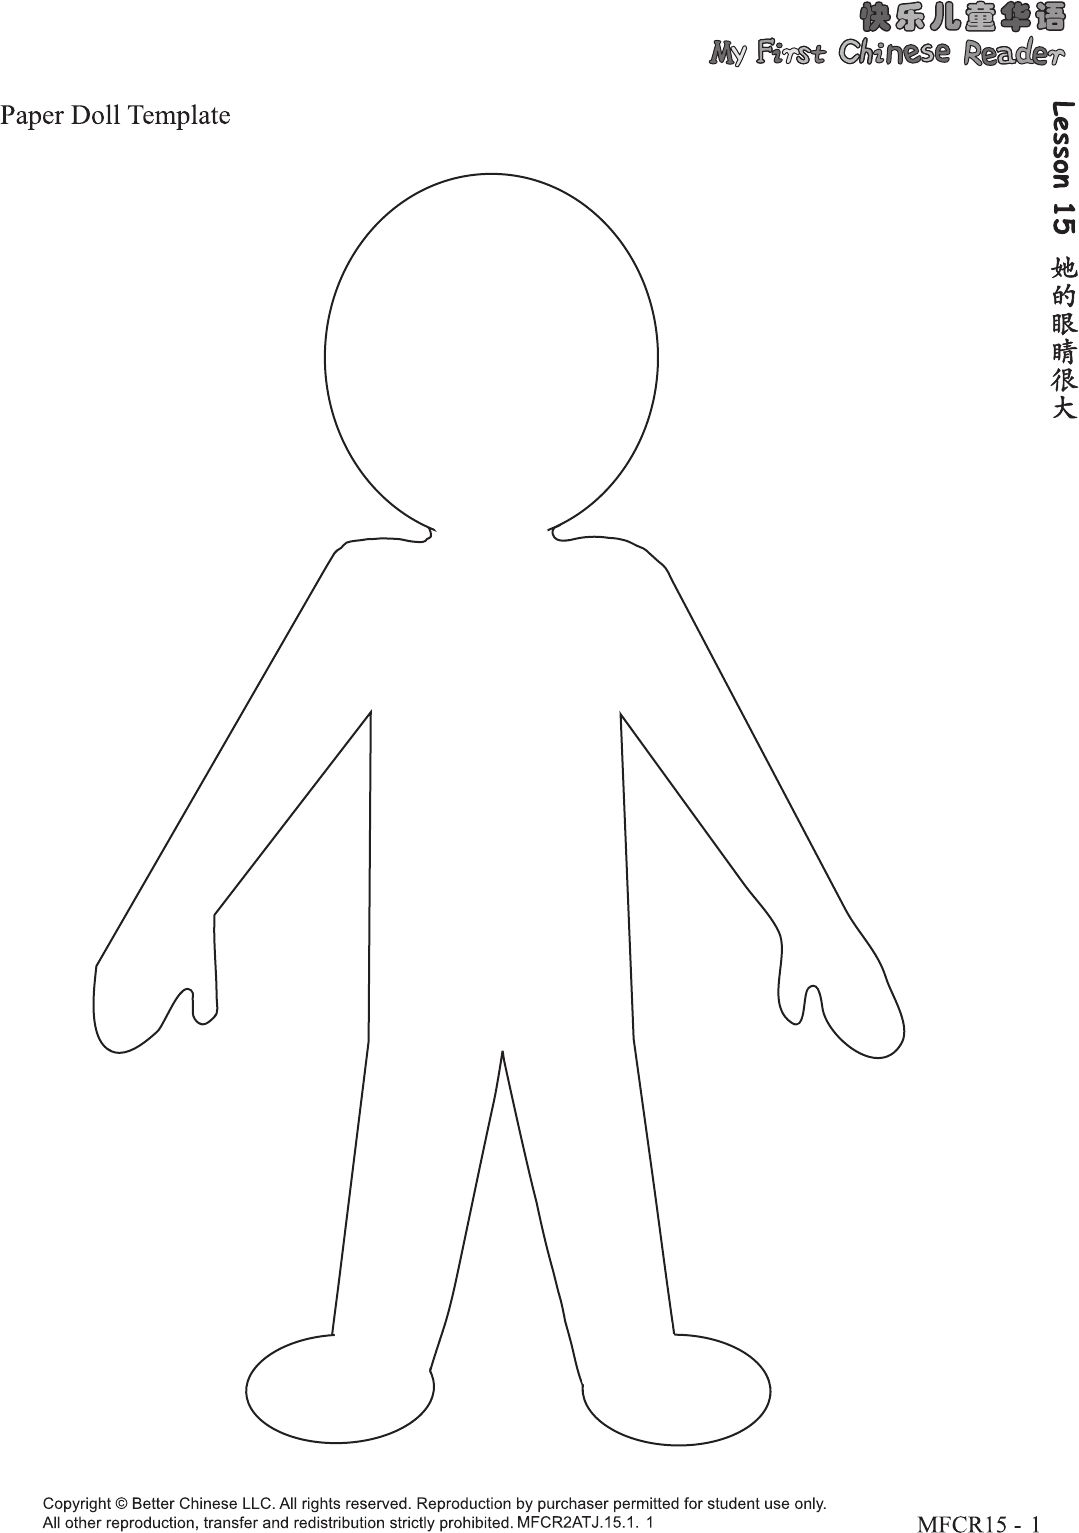 Free Printable Paper Doll Template Get What You Need